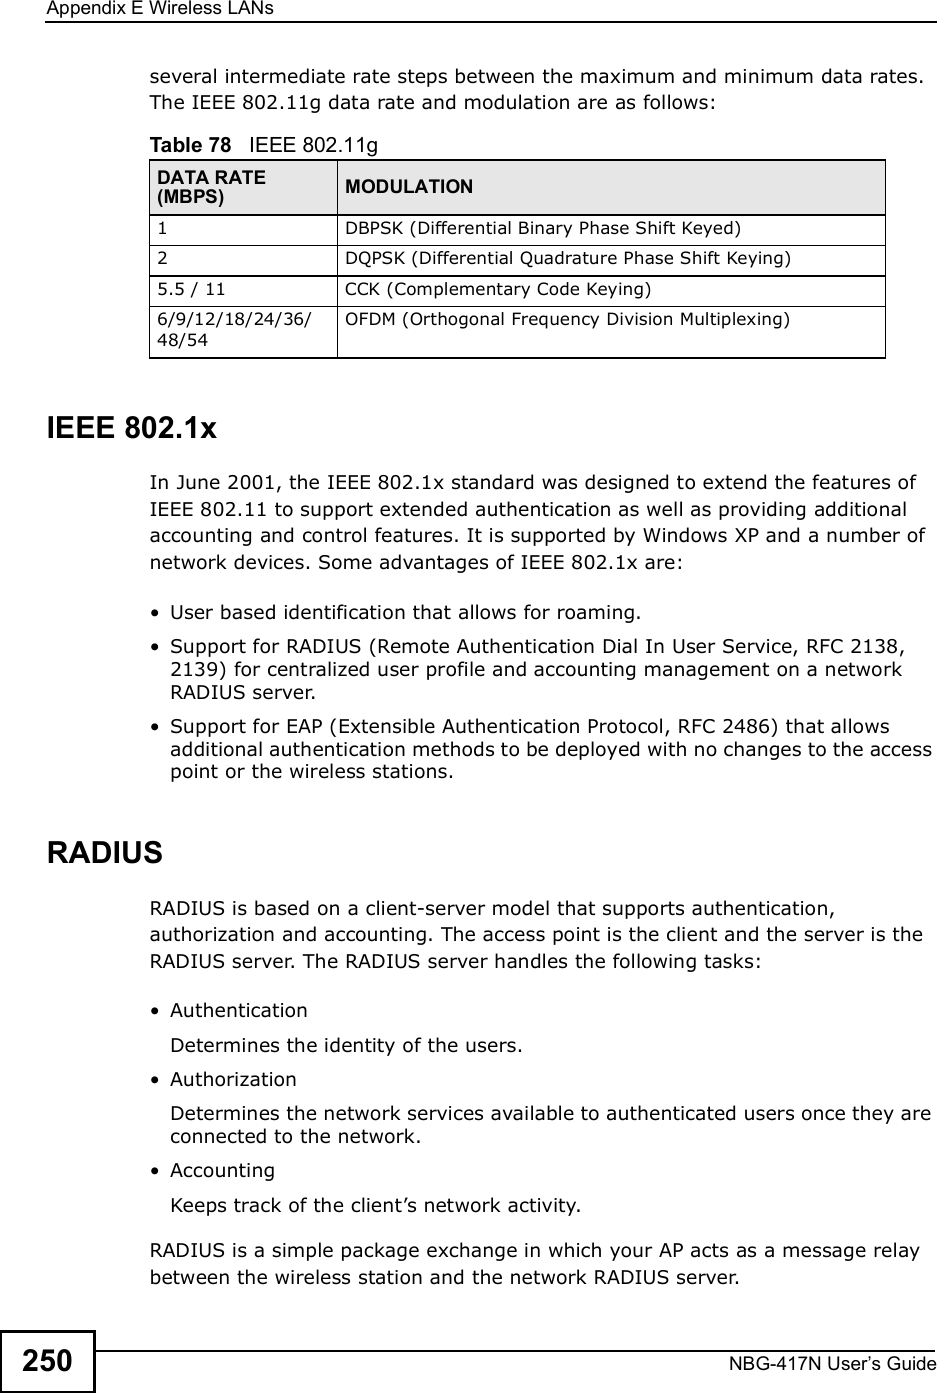 Appendix EWireless LANsNBG-417N User s Guide250several intermediate rate steps between the maximum and minimum data rates. The IEEE 802.11g data rate and modulation are as follows:IEEE 802.1xIn June 2001, the IEEE 802.1x standard was designed to extend the features of IEEE 802.11 to support extended authentication as well as providing additional accounting and control features. It is supported by Windows XP and a number of network devices. Some advantages of IEEE 802.1x are: User based identification that allows for roaming. Support for RADIUS (Remote Authentication Dial In User Service, RFC 2138, 2139) for centralized user profile and accounting management on a network RADIUS server.  Support for EAP (Extensible Authentication Protocol, RFC 2486) that allows additional authentication methods to be deployed with no changes to the access point or the wireless stations. RADIUSRADIUS is based on a client-server model that supports authentication, authorization and accounting. The access point is the client and the server is the RADIUS server. The RADIUS server handles the following tasks: Authentication Determines the identity of the users. AuthorizationDetermines the network services available to authenticated users once they are connected to the network. AccountingKeeps track of the client!s network activity. RADIUS is a simple package exchange in which your AP acts as a message relay between the wireless station and the network RADIUS server. Table 78   IEEE 802.11gDATA RATE (MBPS) MODULATION1DBPSK (Differential Binary Phase Shift Keyed)2DQPSK (Differential Quadrature Phase Shift Keying)5.5 / 11CCK (Complementary Code Keying) 6/9/12/18/24/36/48/54OFDM (Orthogonal Frequency Division Multiplexing) 